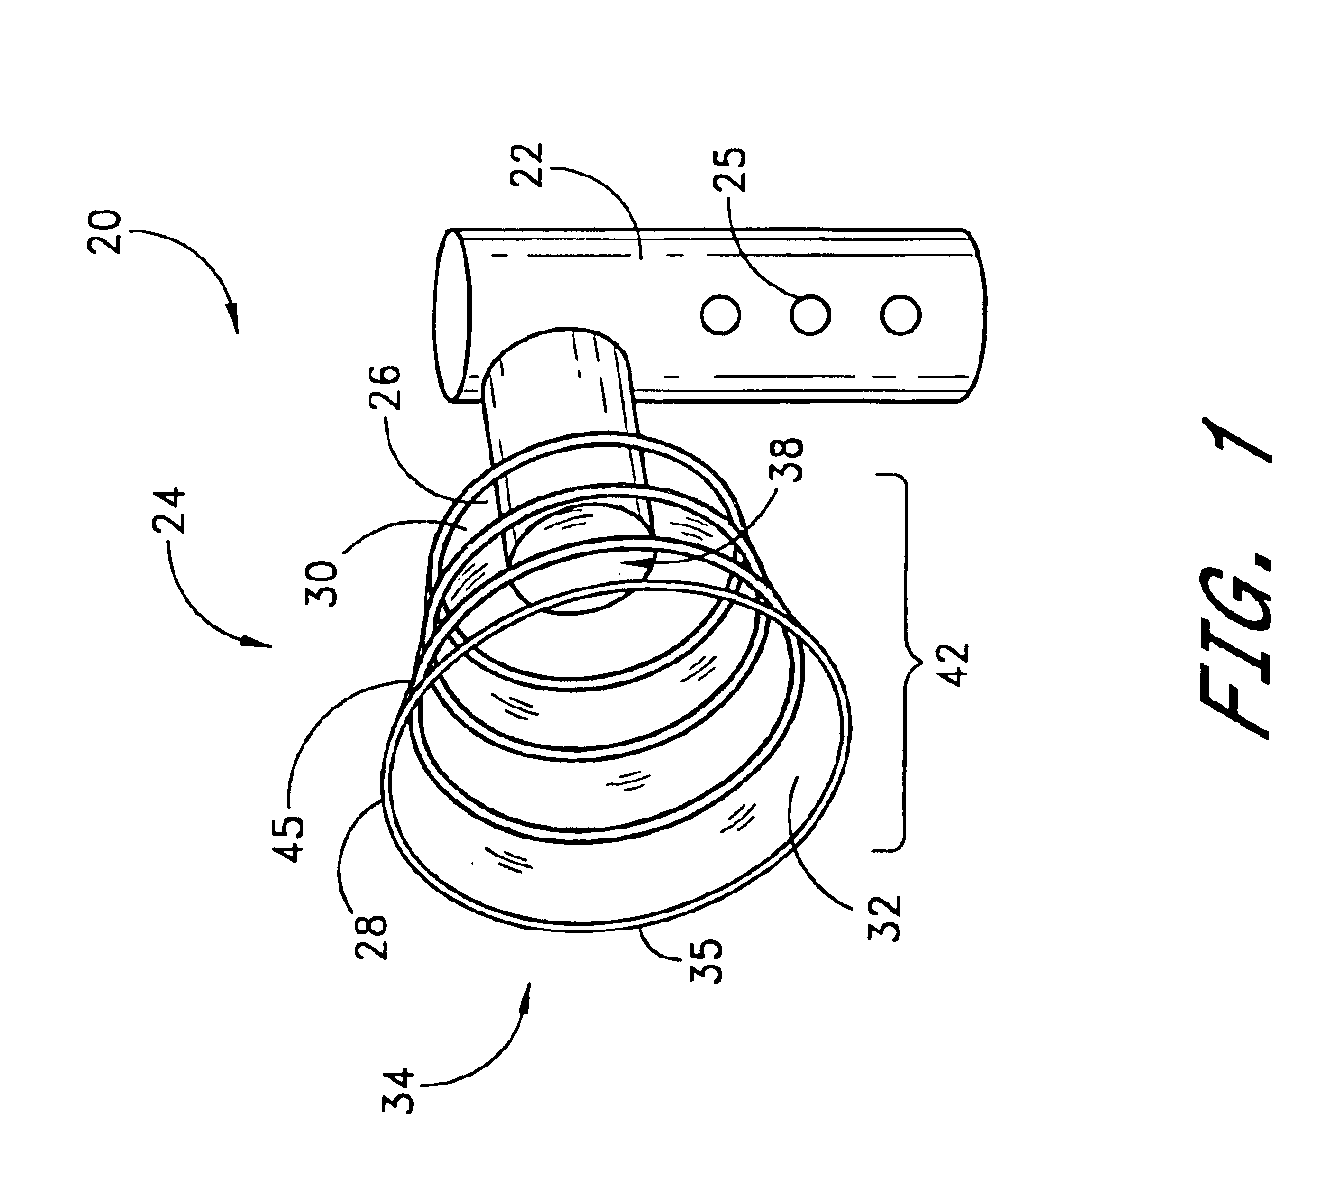 Method and apparatus for noninvasive intraductal fluid diagnostic screen